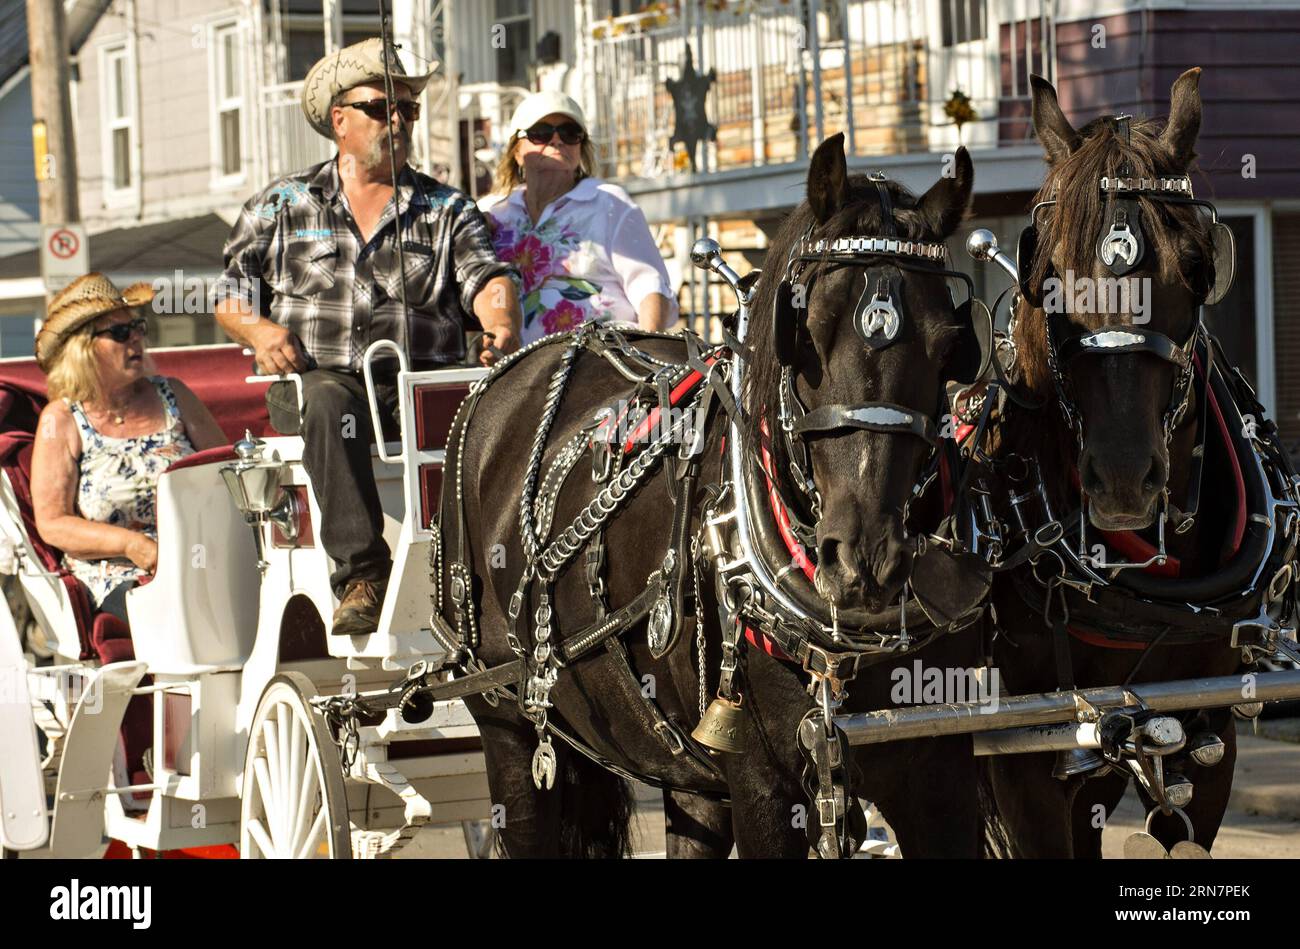 (150916) -- QUEBEC, Sept. 16, 2015 -- People take a carriage during the Western Festival in Quebec, Canada, Sept. 16, 2015. The village of St-Tite, Canada, hosted more than 600,000 visitors for the two-week Western Festival St-Tite which is also east Canada s largest Rodeo. In addition to traditional rodeo competitions, there are also multiple cultural activities. ) CANADA-QUEBEC-WESTERN-FESTIVAL-RODEO AndrewxSoong PUBLICATIONxNOTxINxCHN   Quebec Sept 16 2015 Celebrities Take a carriage during The Western Festival in Quebec Canada Sept 16 2015 The Village of St tite Canada hosted More than 600 Stock Photo